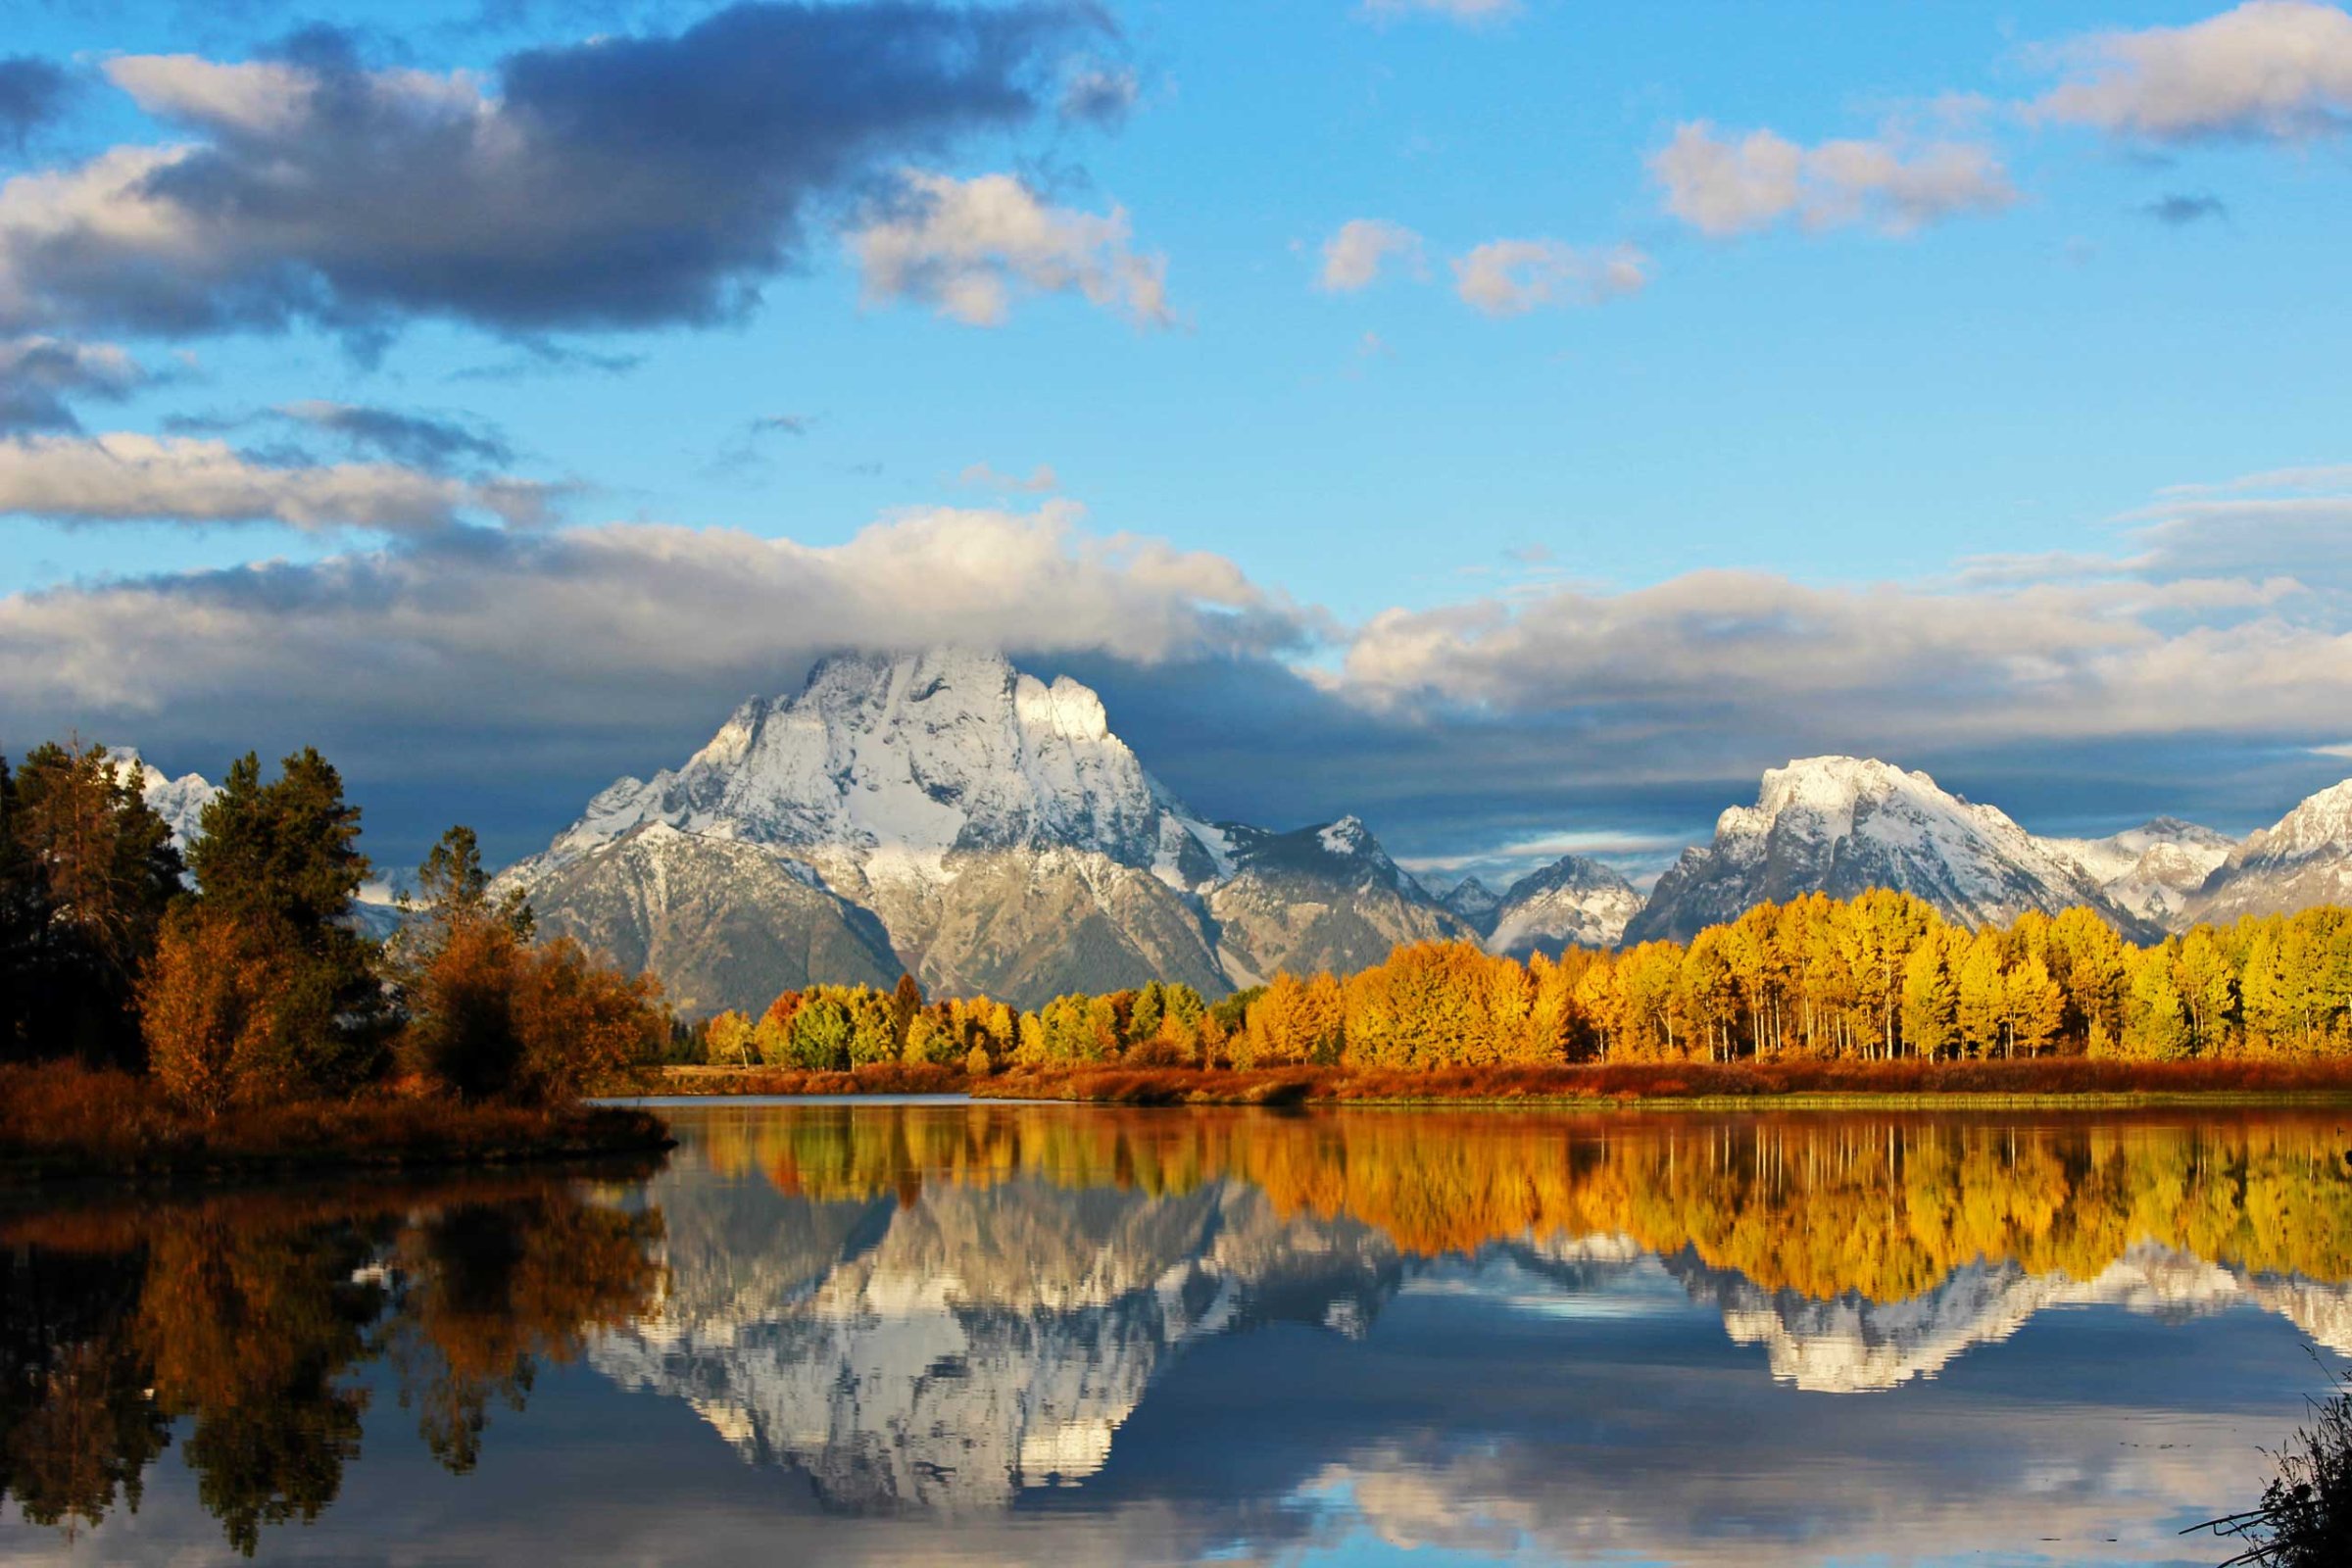 Our public lands give some of the most spectacular views, like this one of Grand Teton National Park in Wyoming